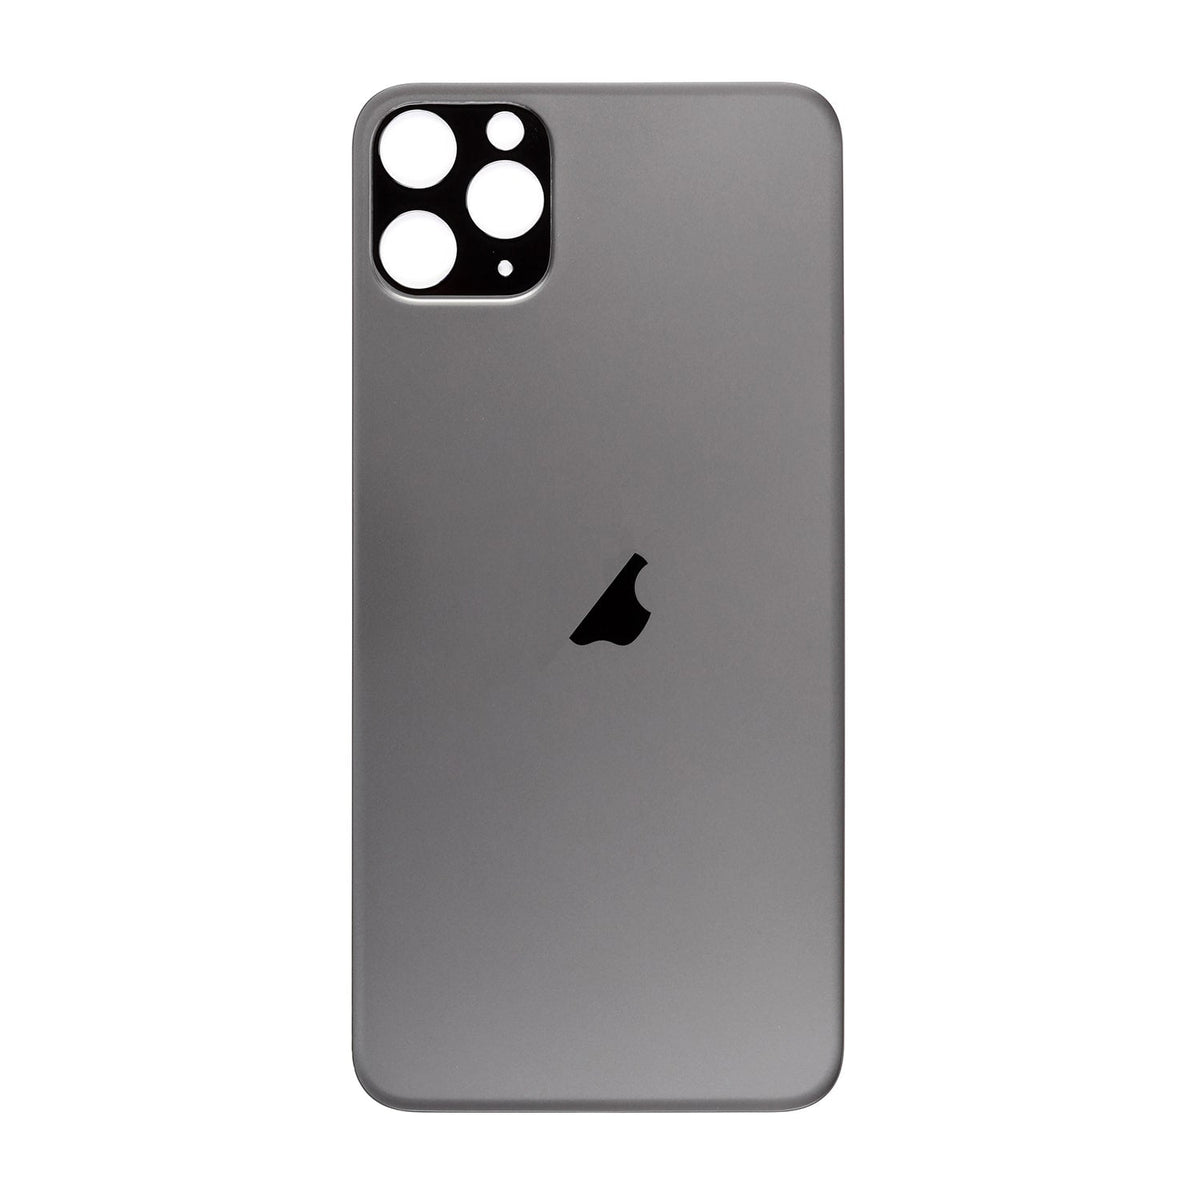 BACK COVER - SPACE GRAY FOR IPHONE 11 PRO